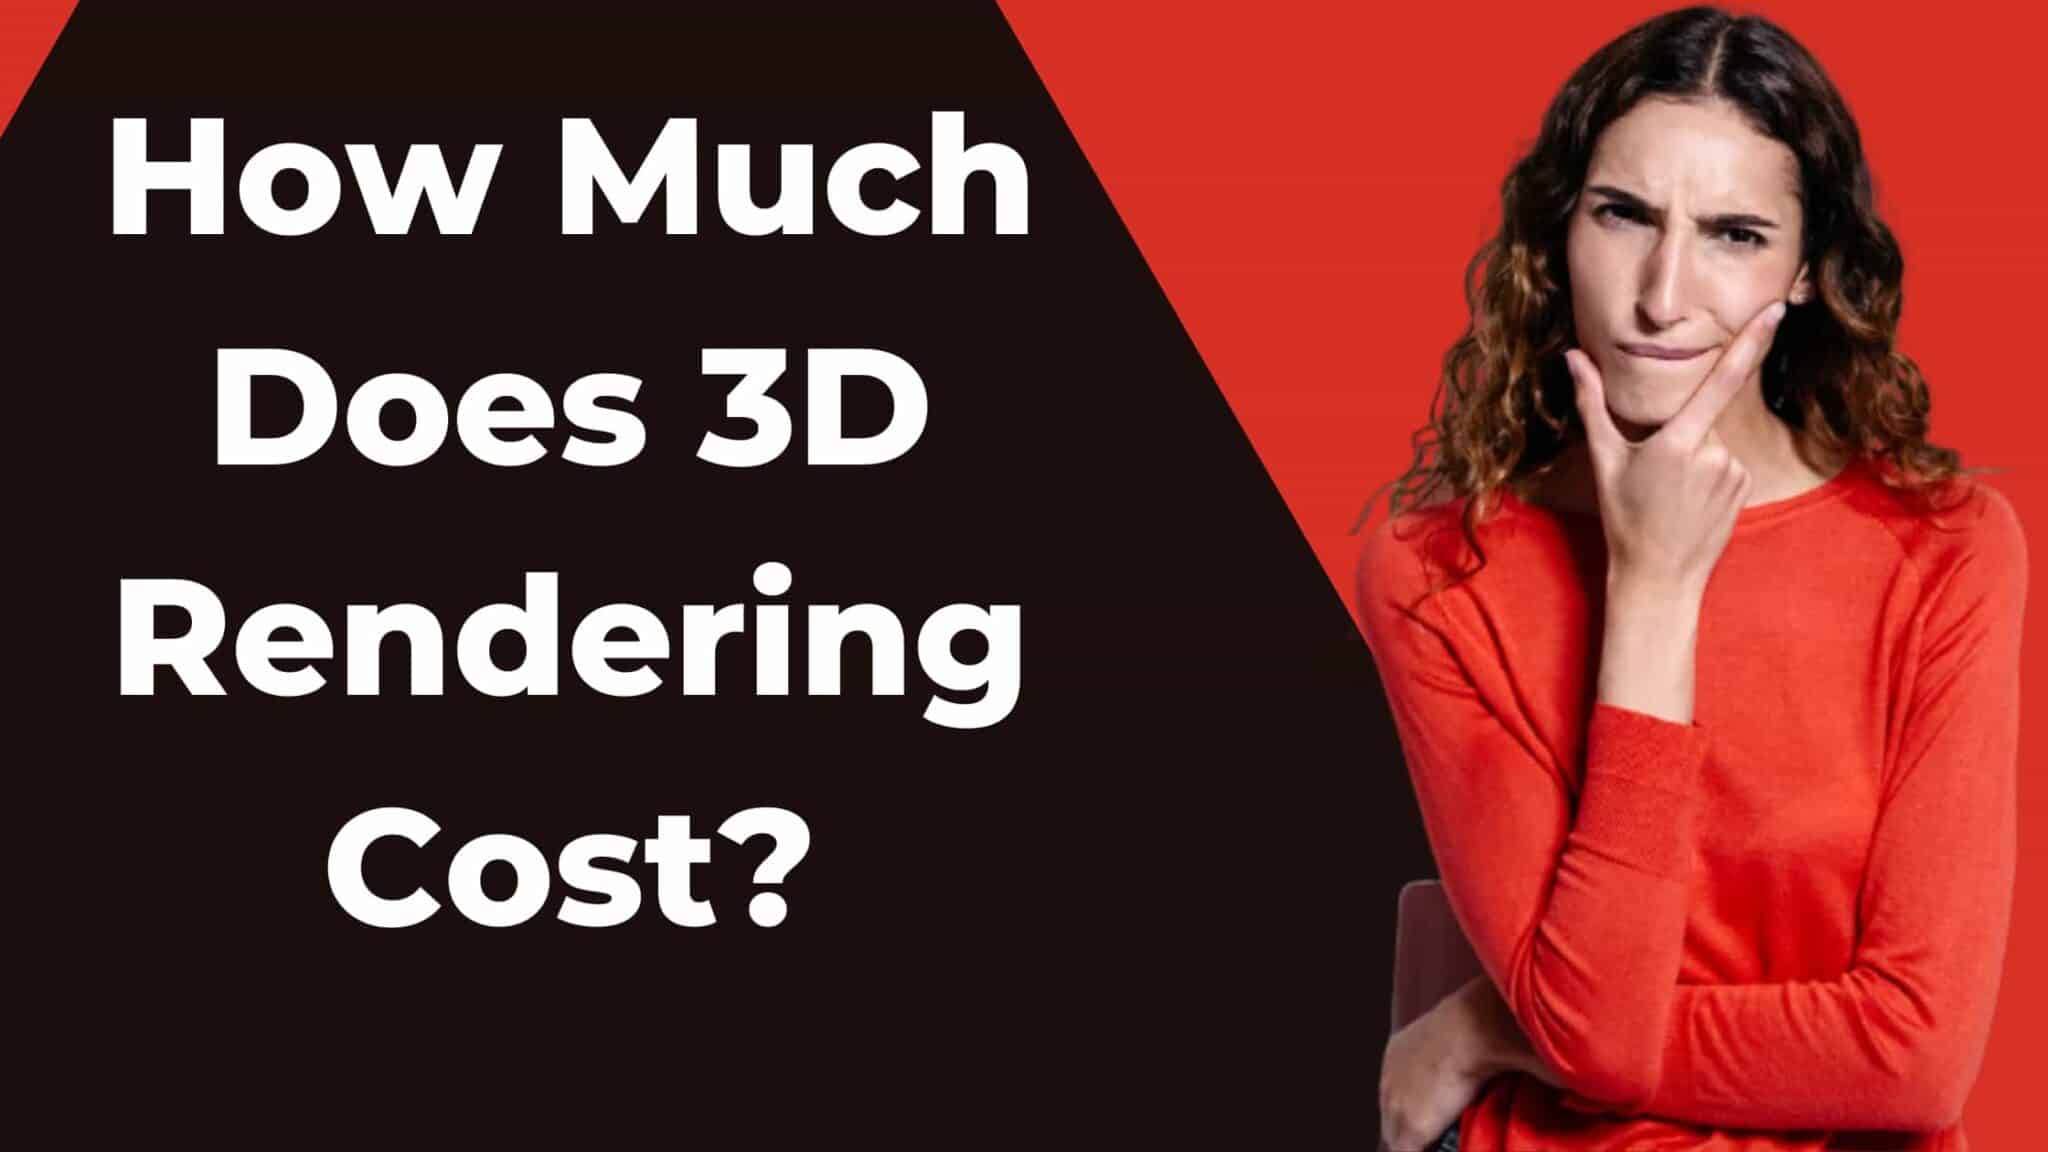 3D Rendering Services Prices & Cost - The Definite Guide (2023)